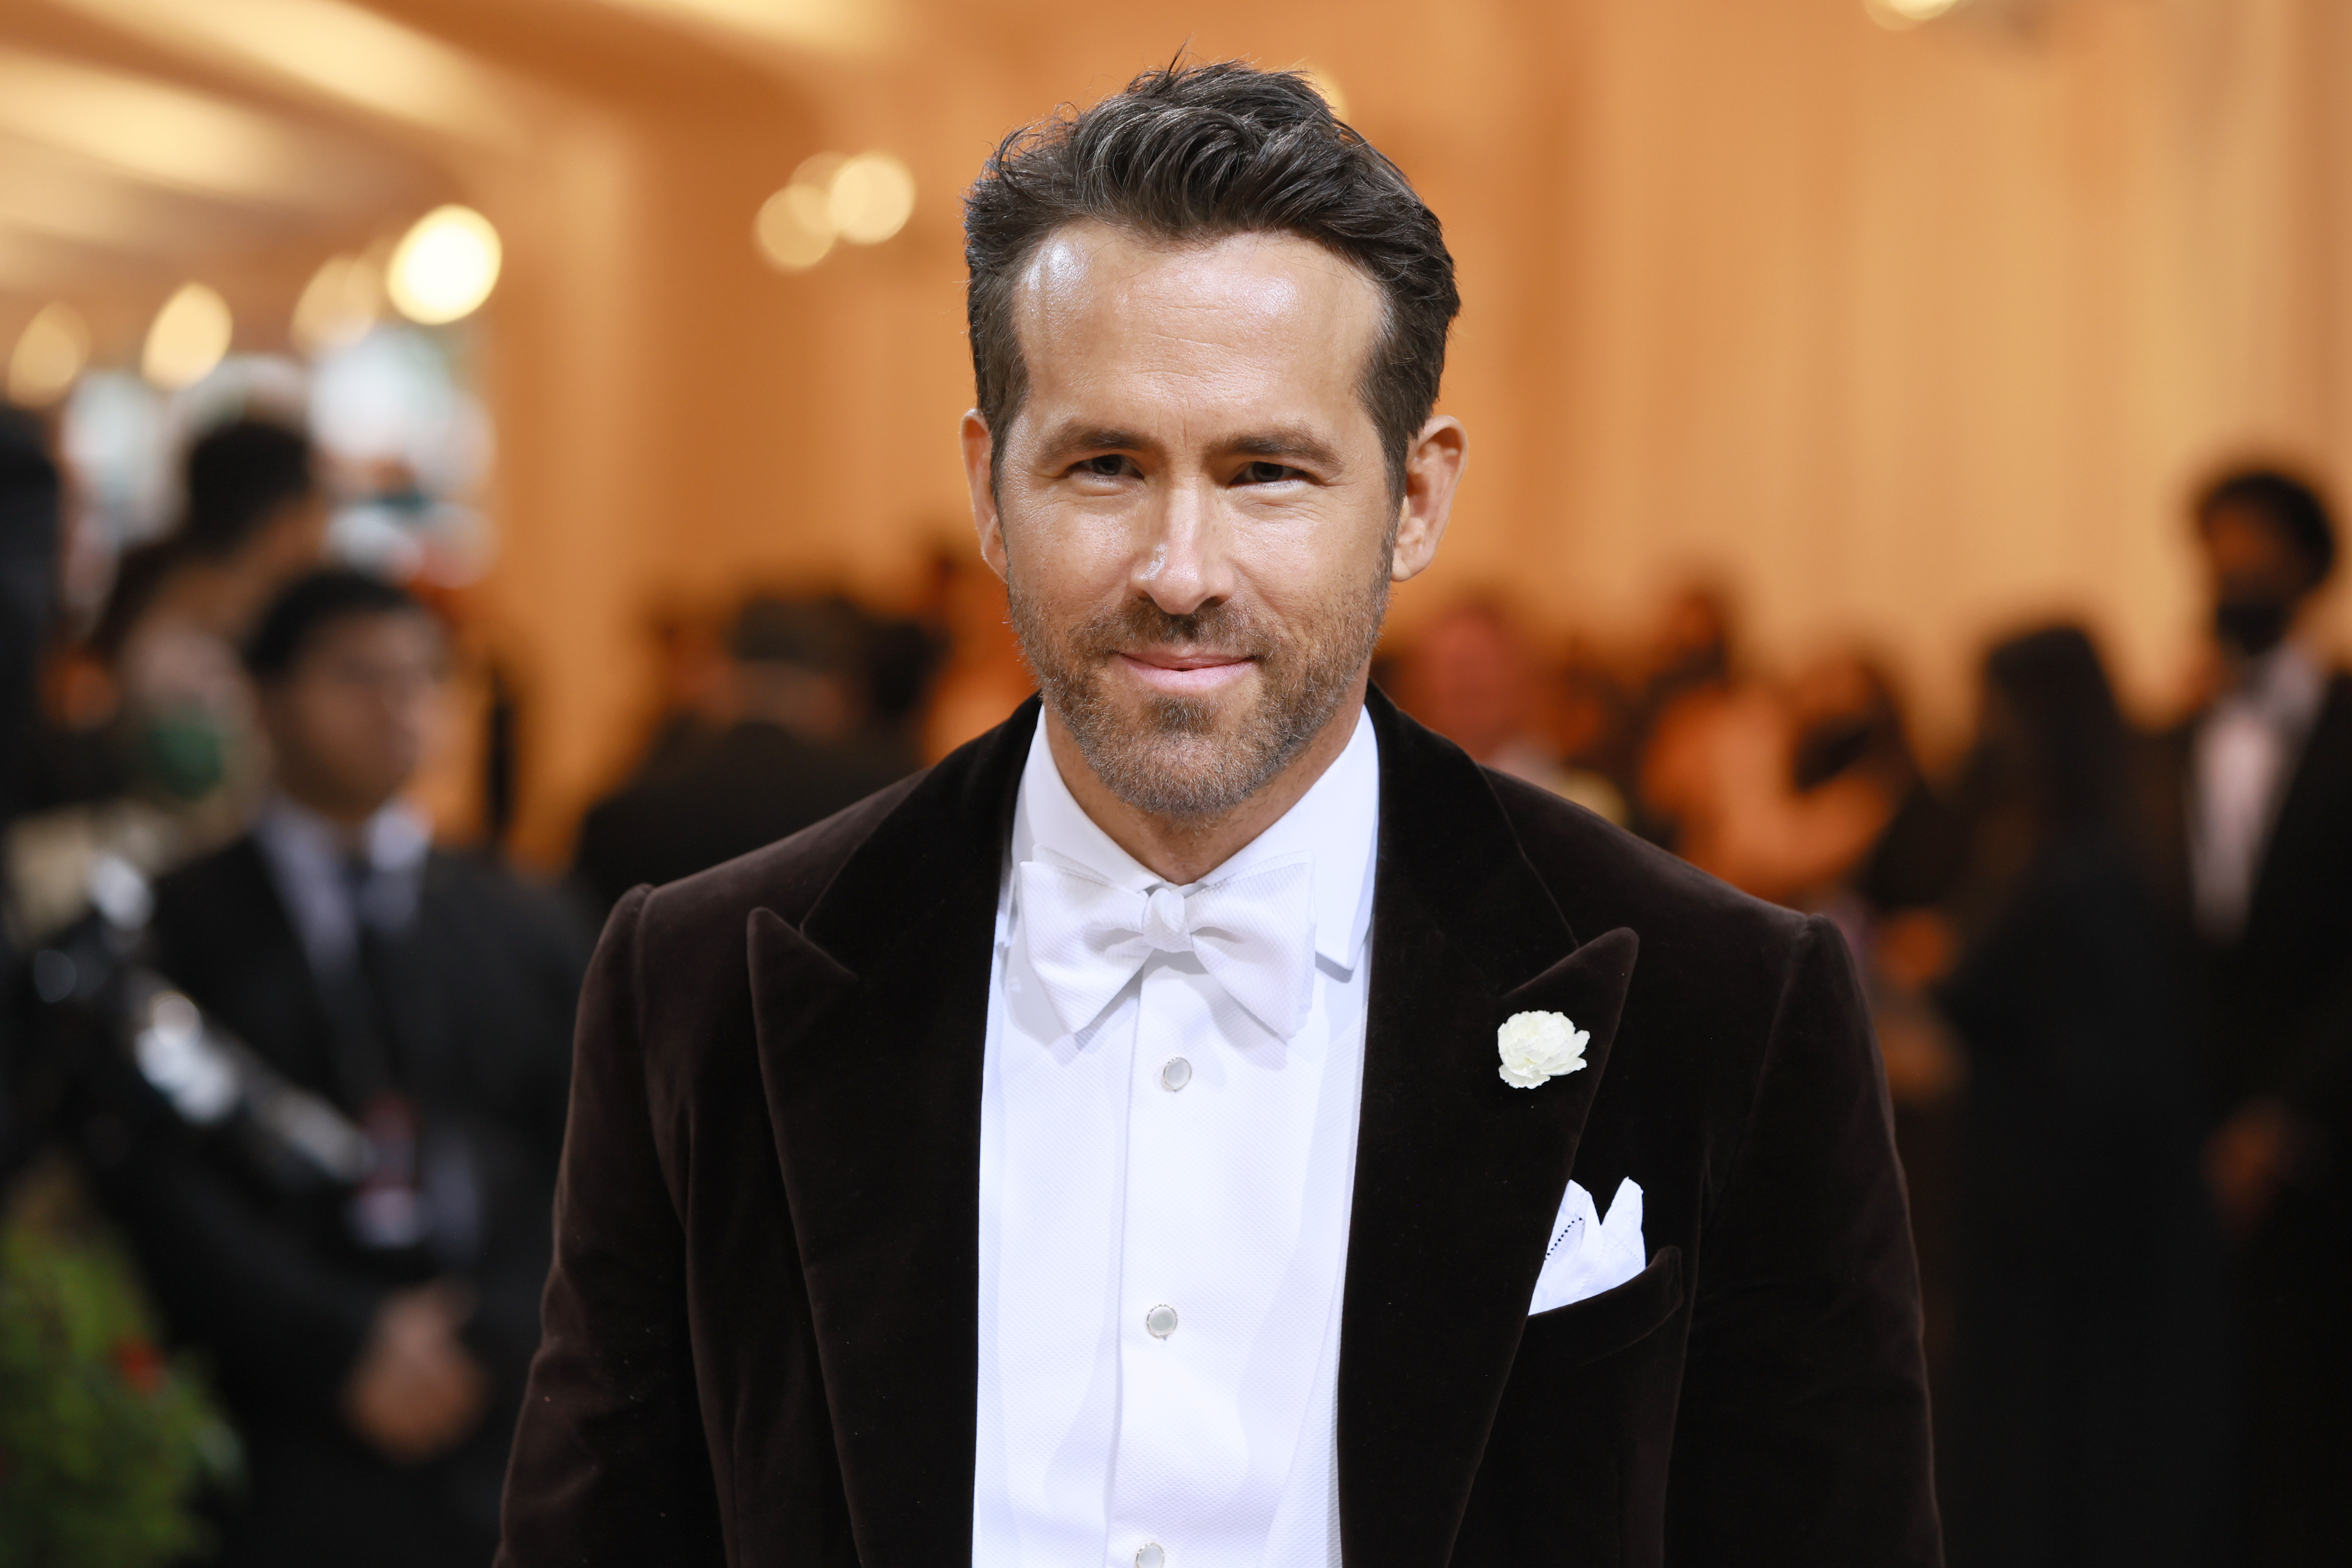 Ryan Reynolds, who many believed would show up in 'Doctor Strange 2' as Deadpool, wears a black velvet suit over a white button-up shirt and white bow tie.